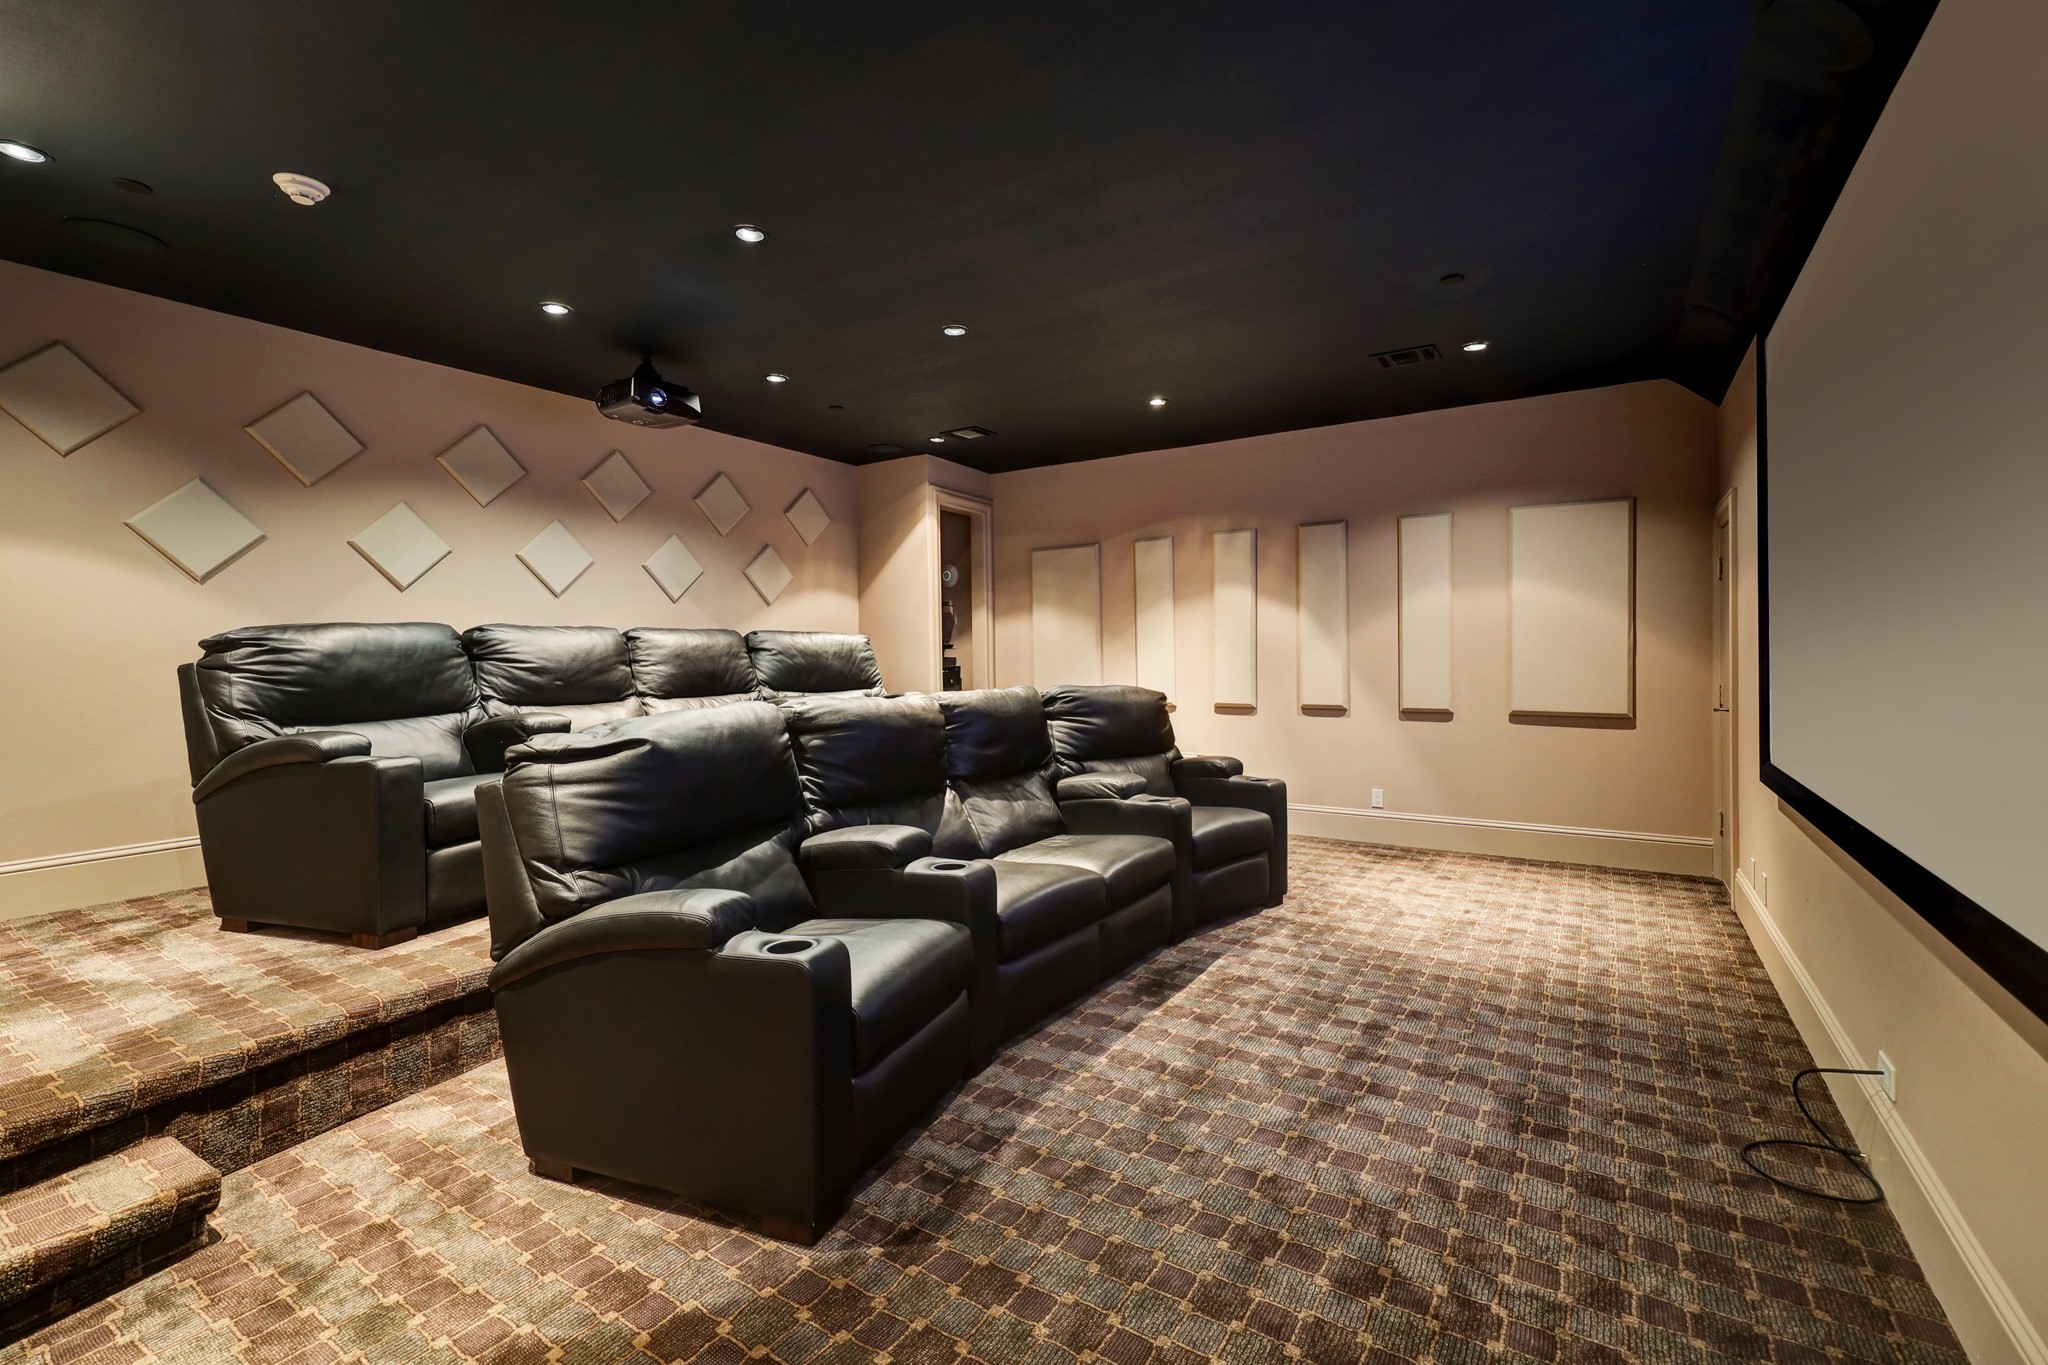 The Home Theater features carpet, raised seating, projector and screen providing the perfect movie-watching experience.